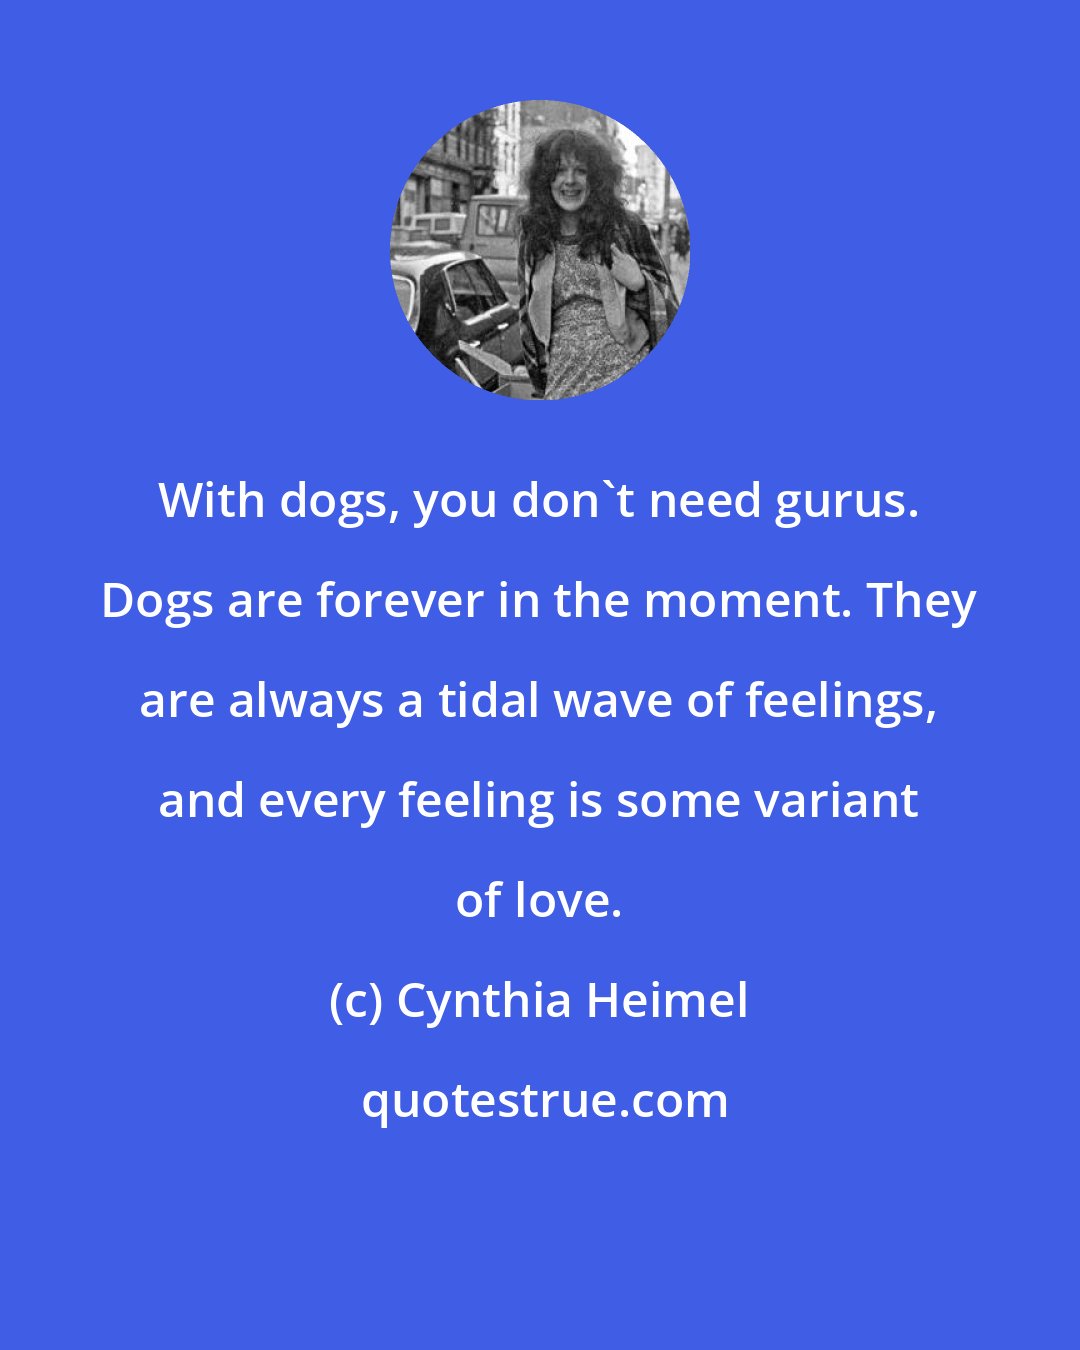 Cynthia Heimel: With dogs, you don't need gurus. Dogs are forever in the moment. They are always a tidal wave of feelings, and every feeling is some variant of love.